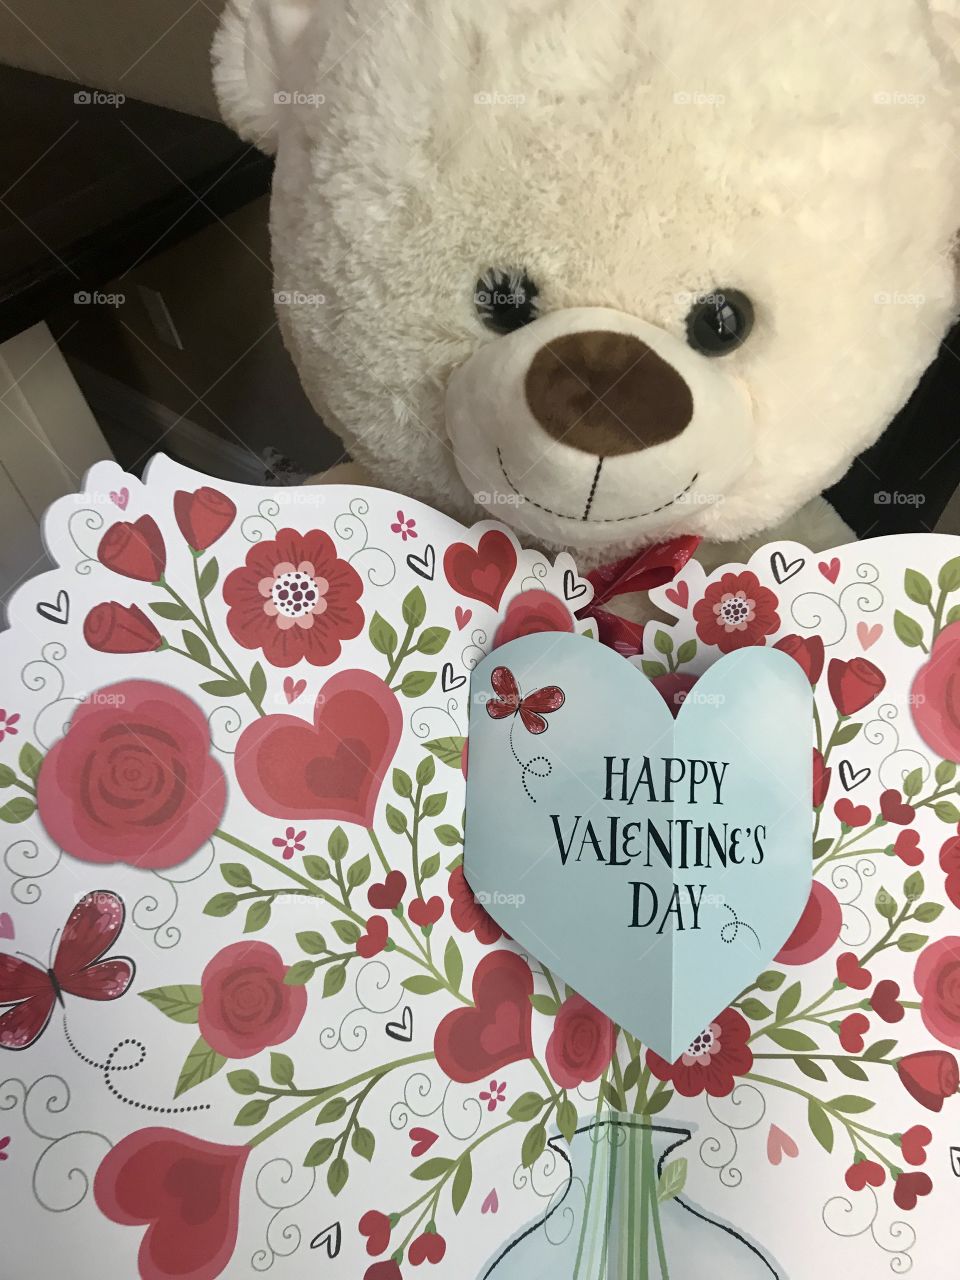  A teddy bear holding a Valentine’s Day card with flowers and hearts and celebration of Valentine’s Day. USA, America